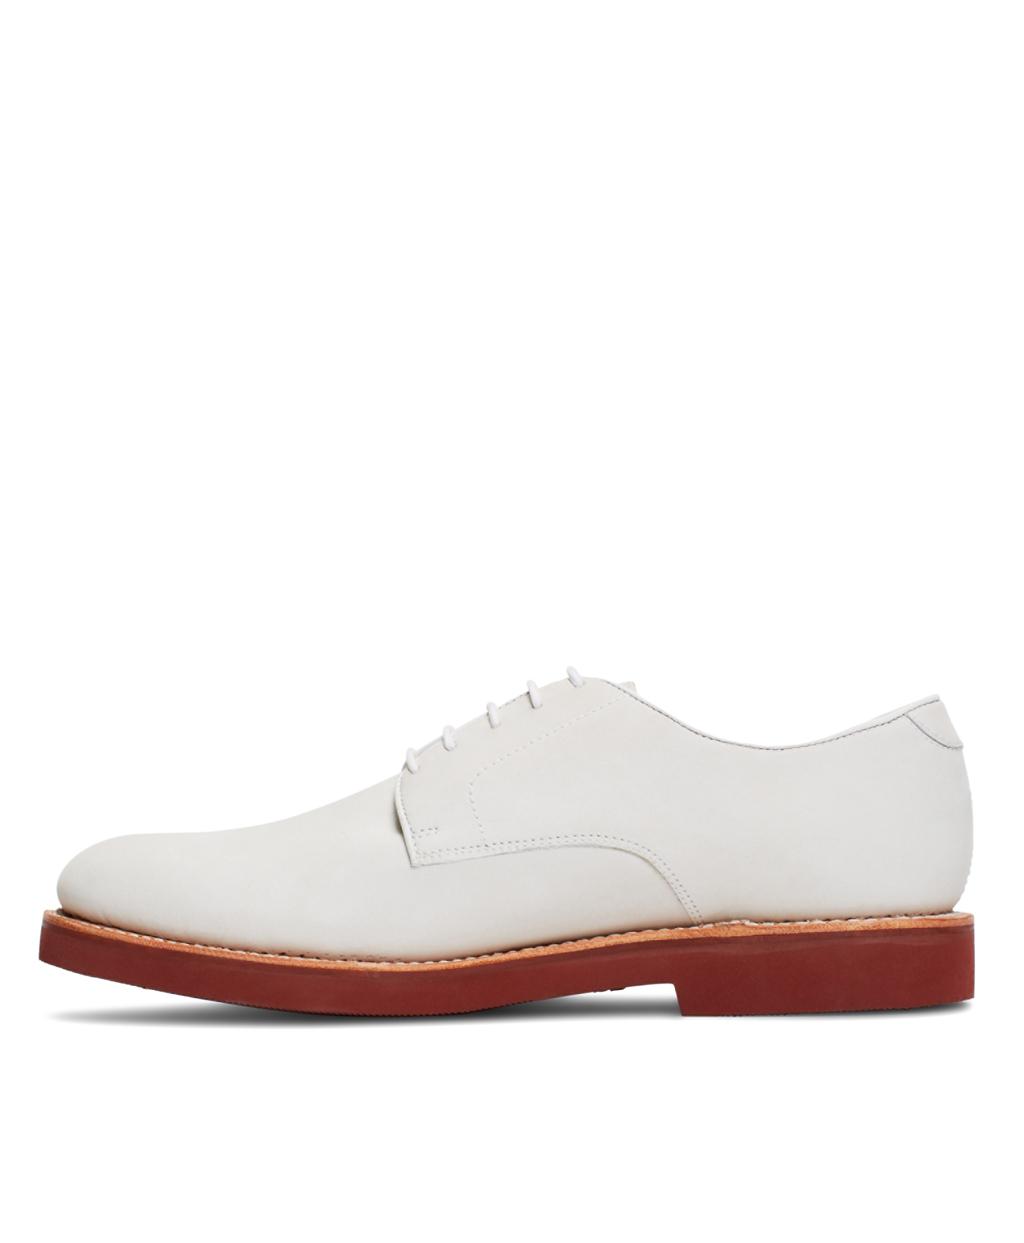 Brooks Brothers Classic Bucks in White for Men - Lyst